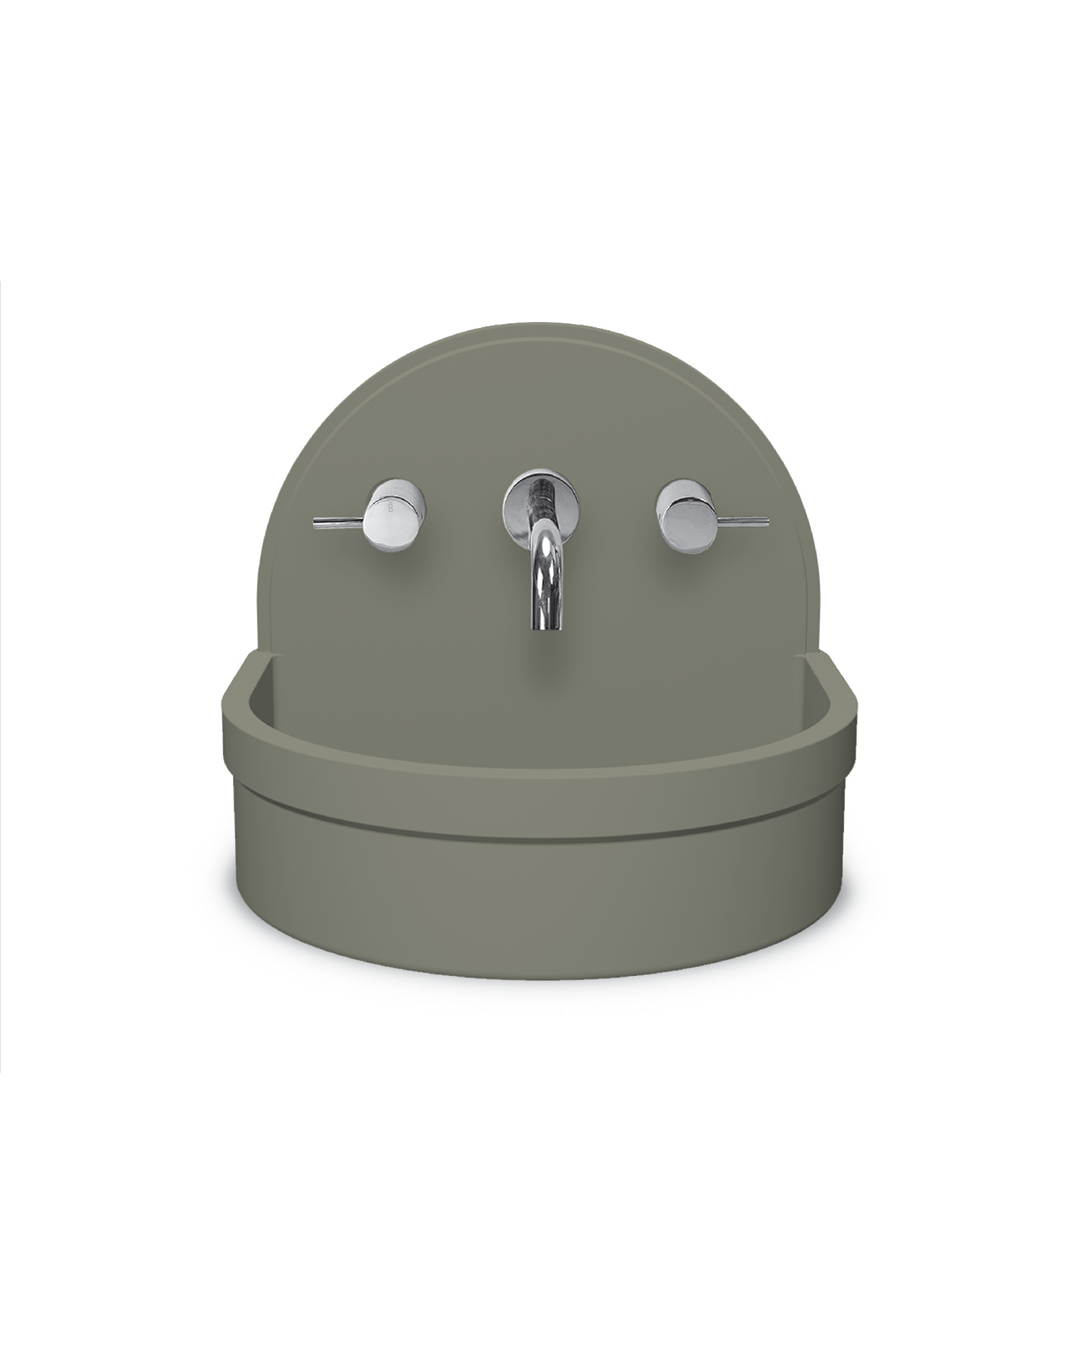 Betty Basin - Surface Mount (Olive)